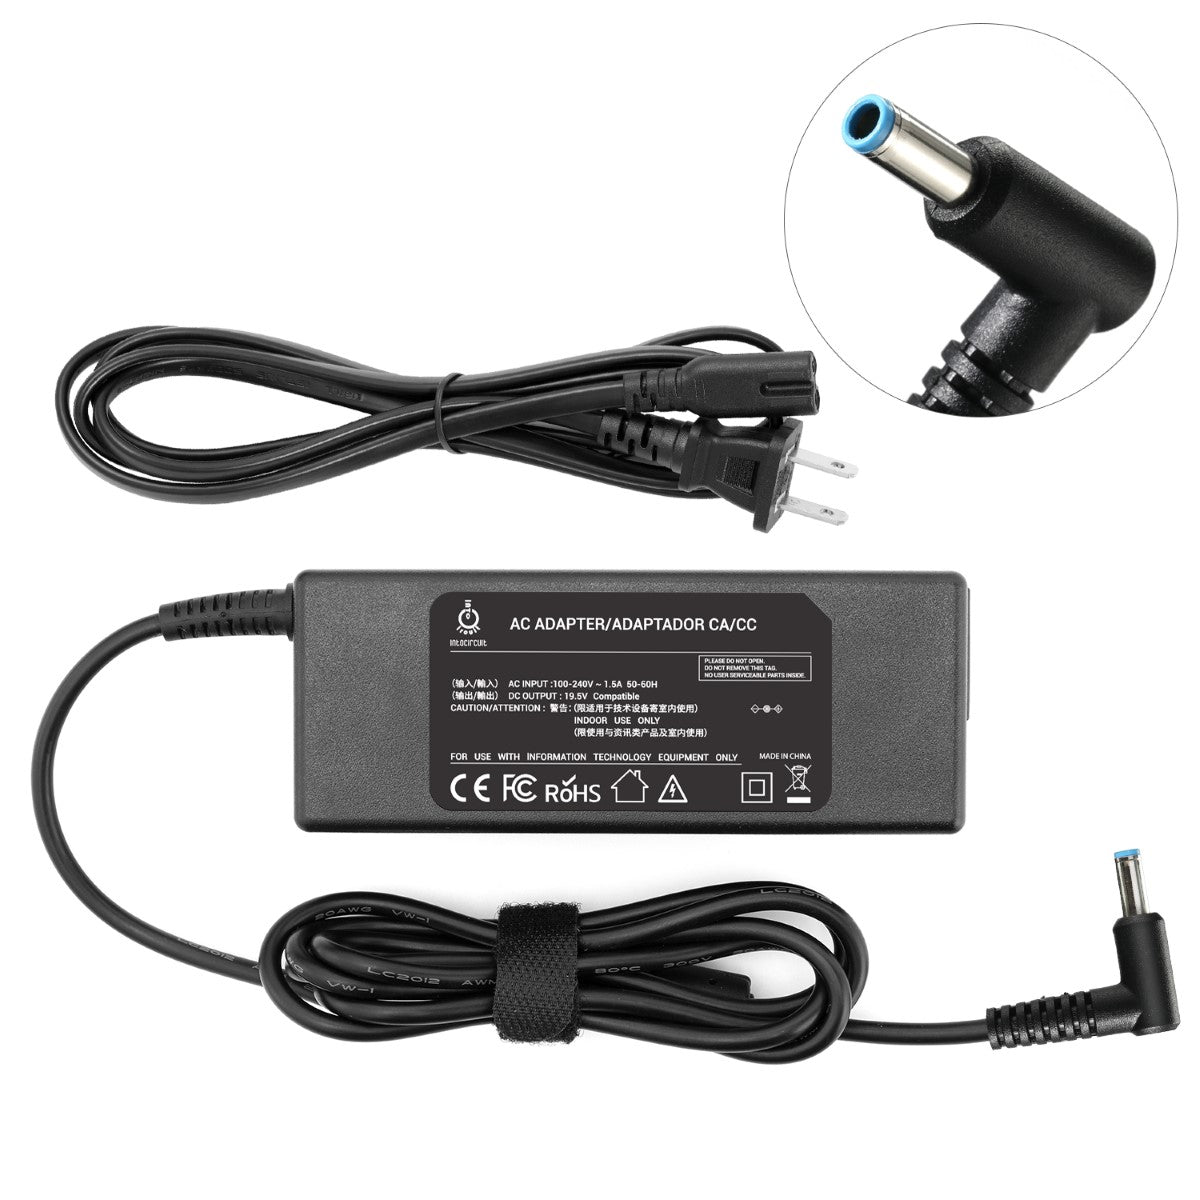 AC Adapter Charger for HP 15-d089wm Notebook